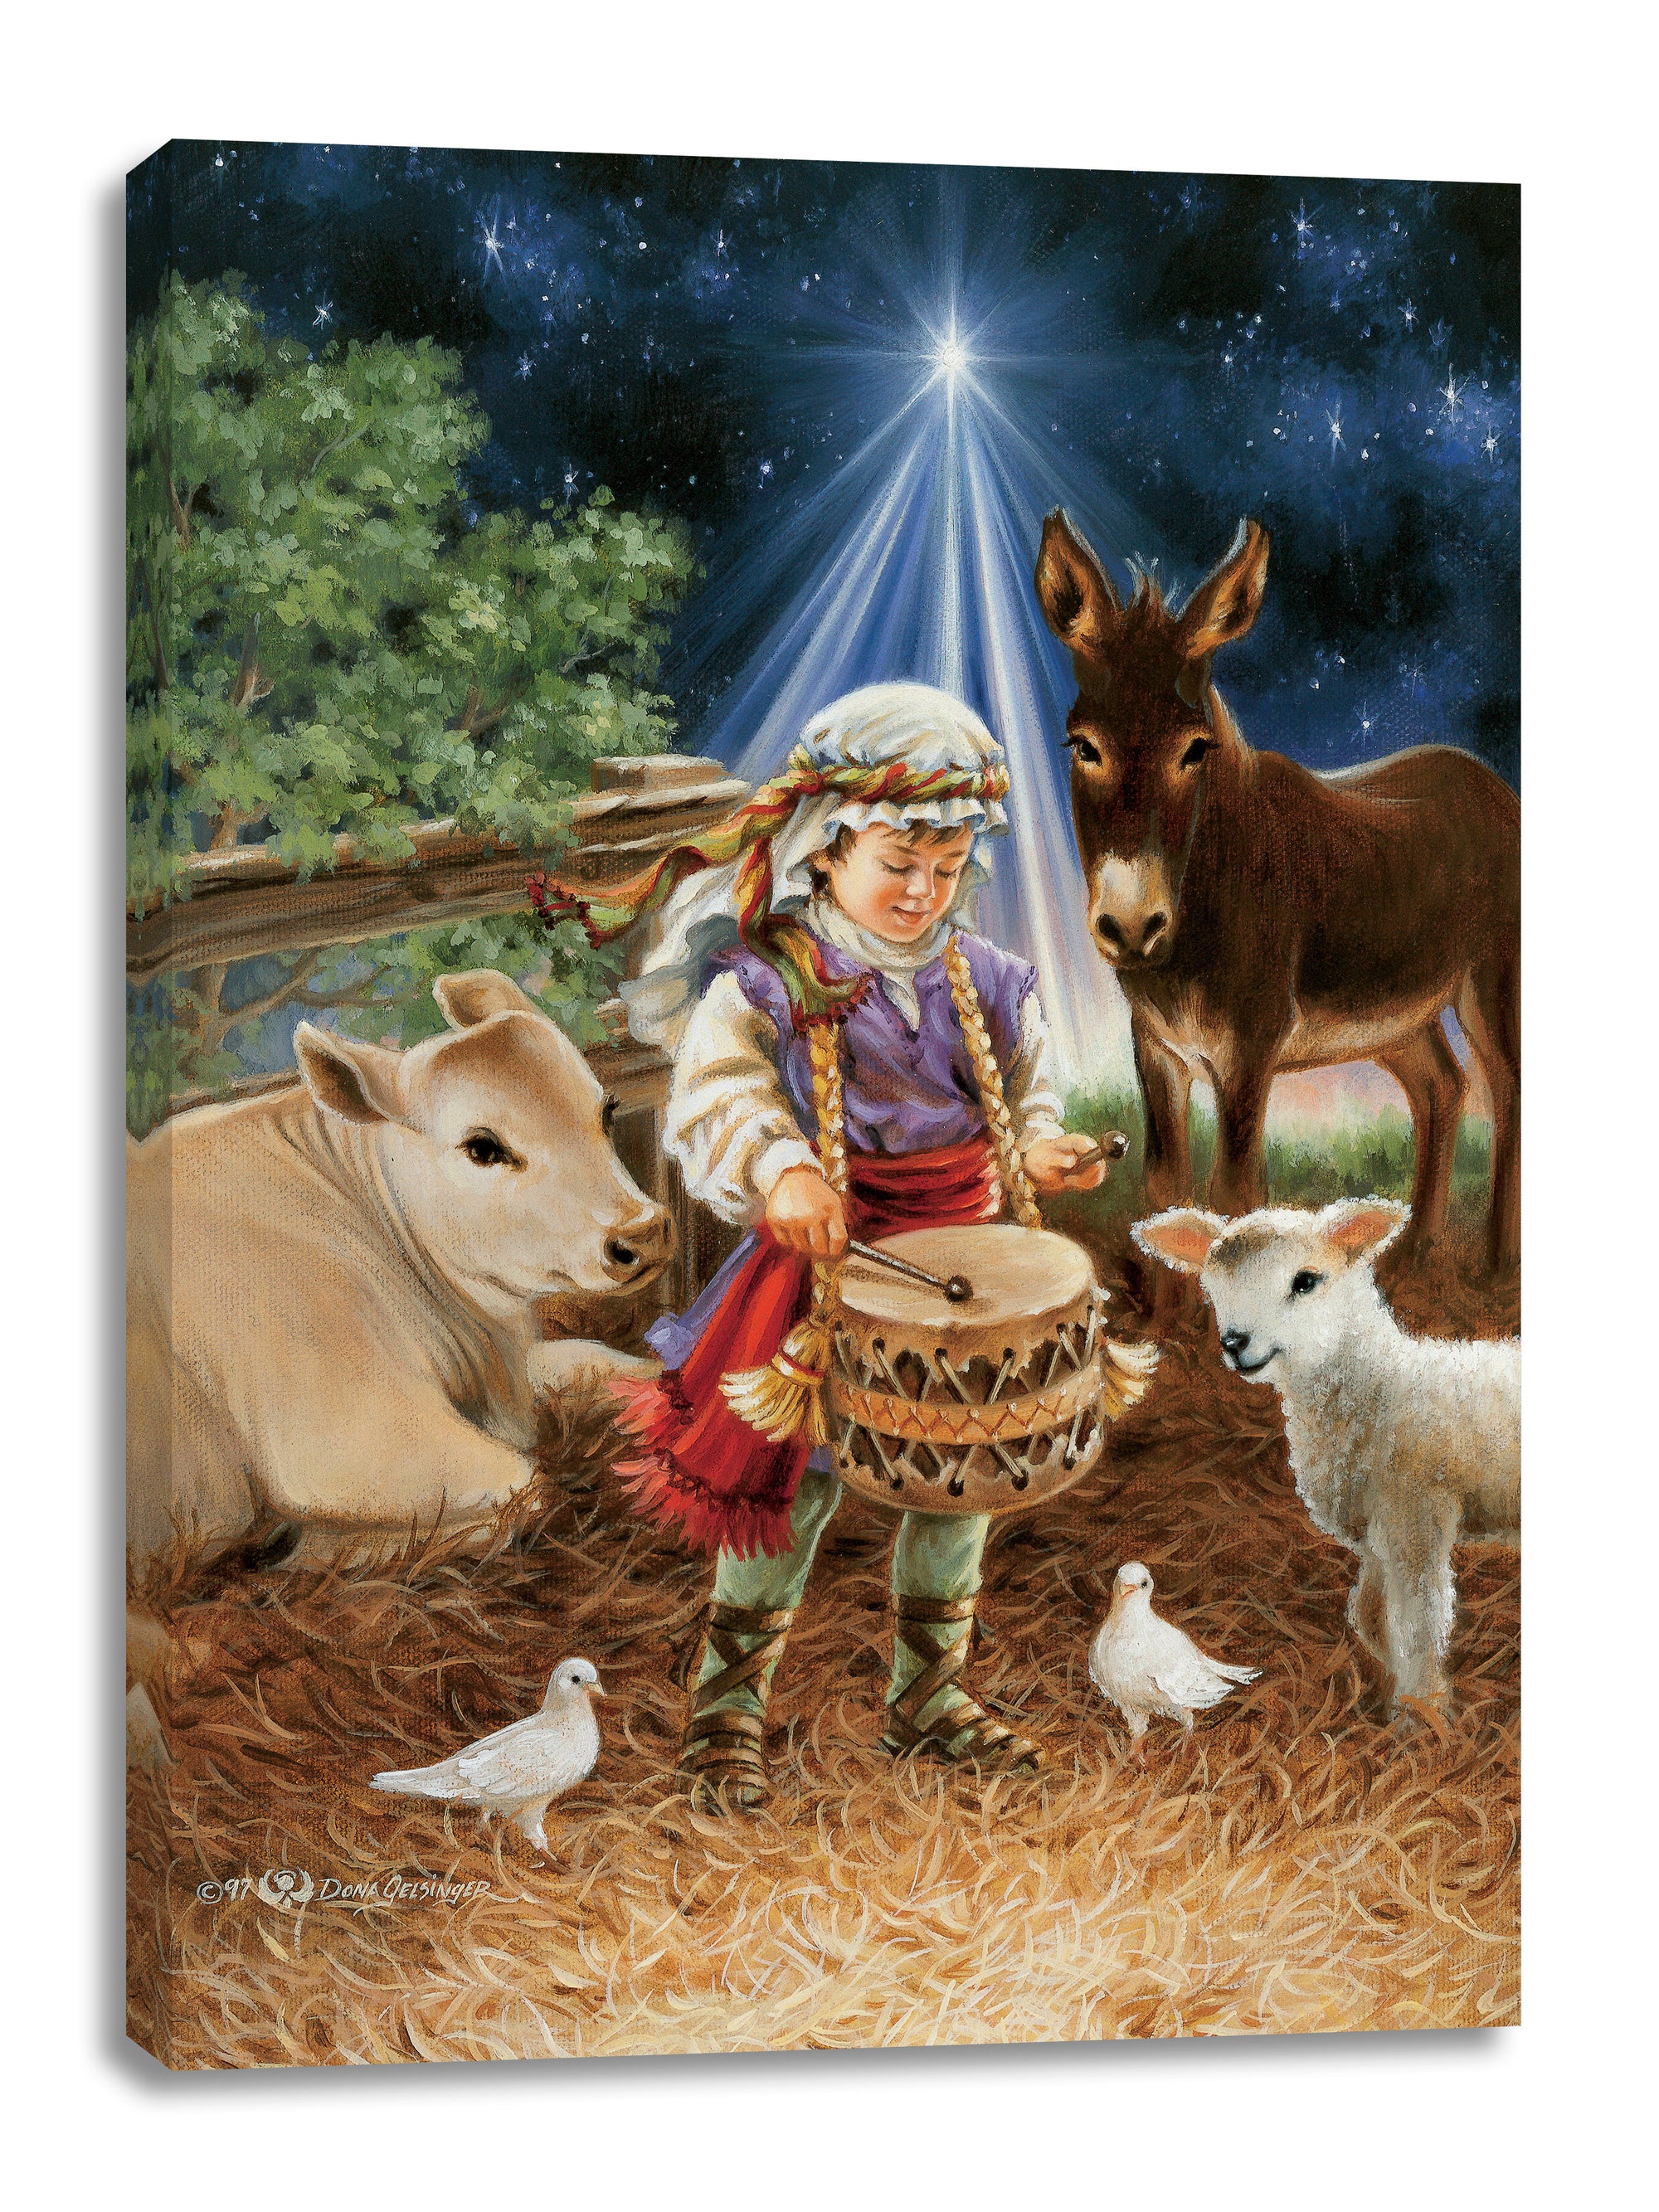  a charming little drummer boy, proudly wearing his drum around his neck, while standing amidst a peaceful and pastoral setting.  At the foot of the little drummer boy, you'll find two gentle doves, a sweet lamb, a friendly donkey, and a gentle cow, all gathered together in harmony, enjoying the music of his drum. As if to bless this serene scene, a radiant star illuminates the entire canvas, casting its radiant light over the tranquil scene.